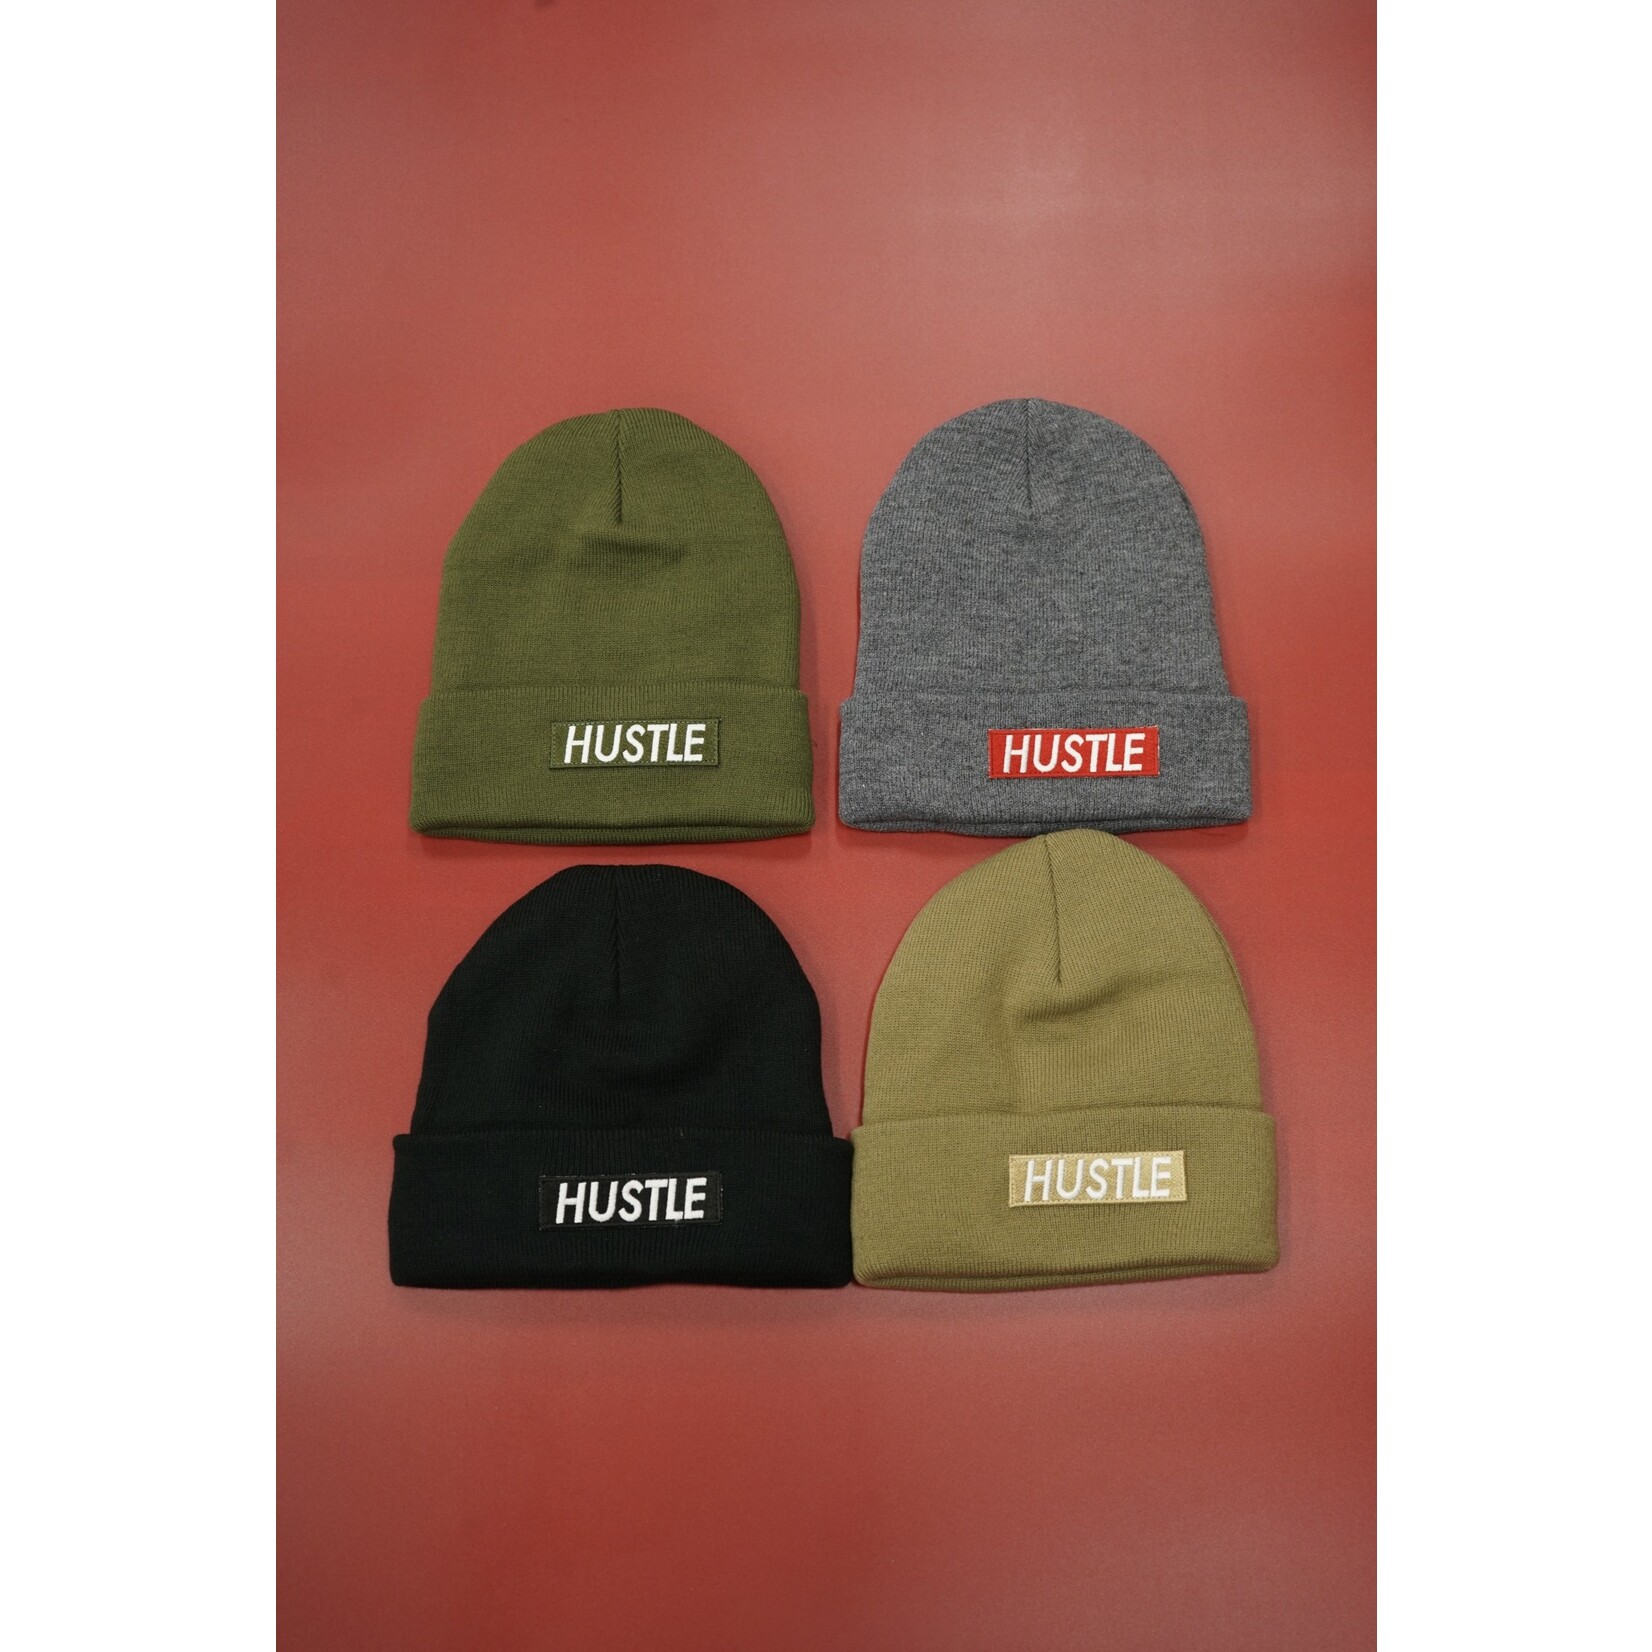 Other HUSTLE BEANIES